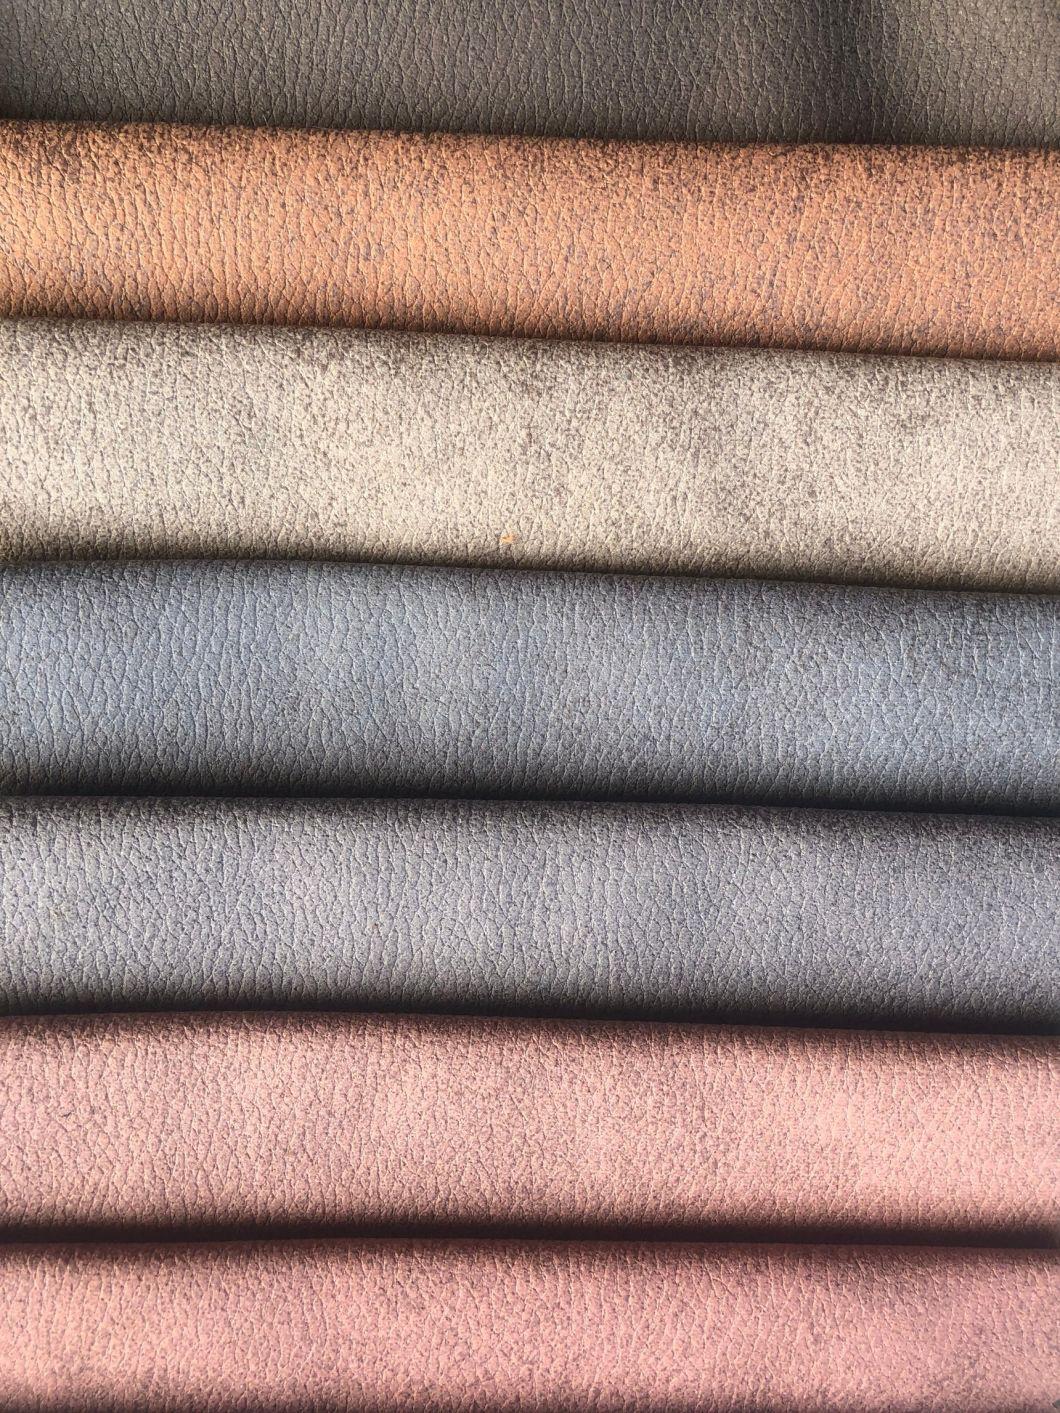 Polyester Leather Looking Knitting Velvet Fabric Furniture Fabric Upholstery Fabric (TL005)